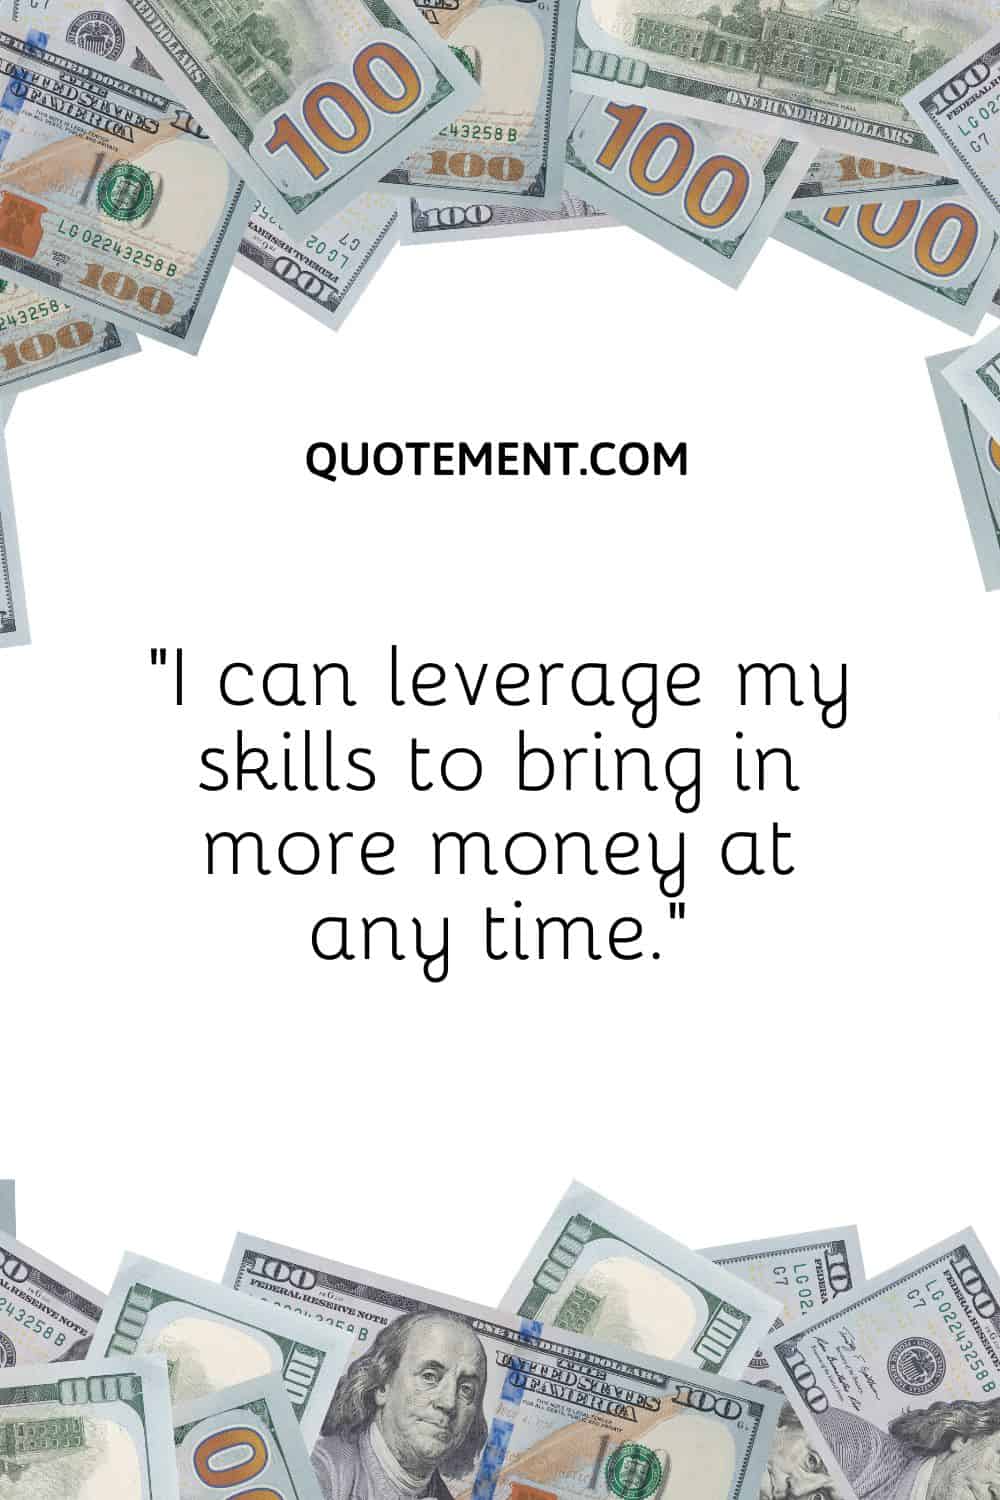 “I can leverage my skills to bring in more money at any time.”